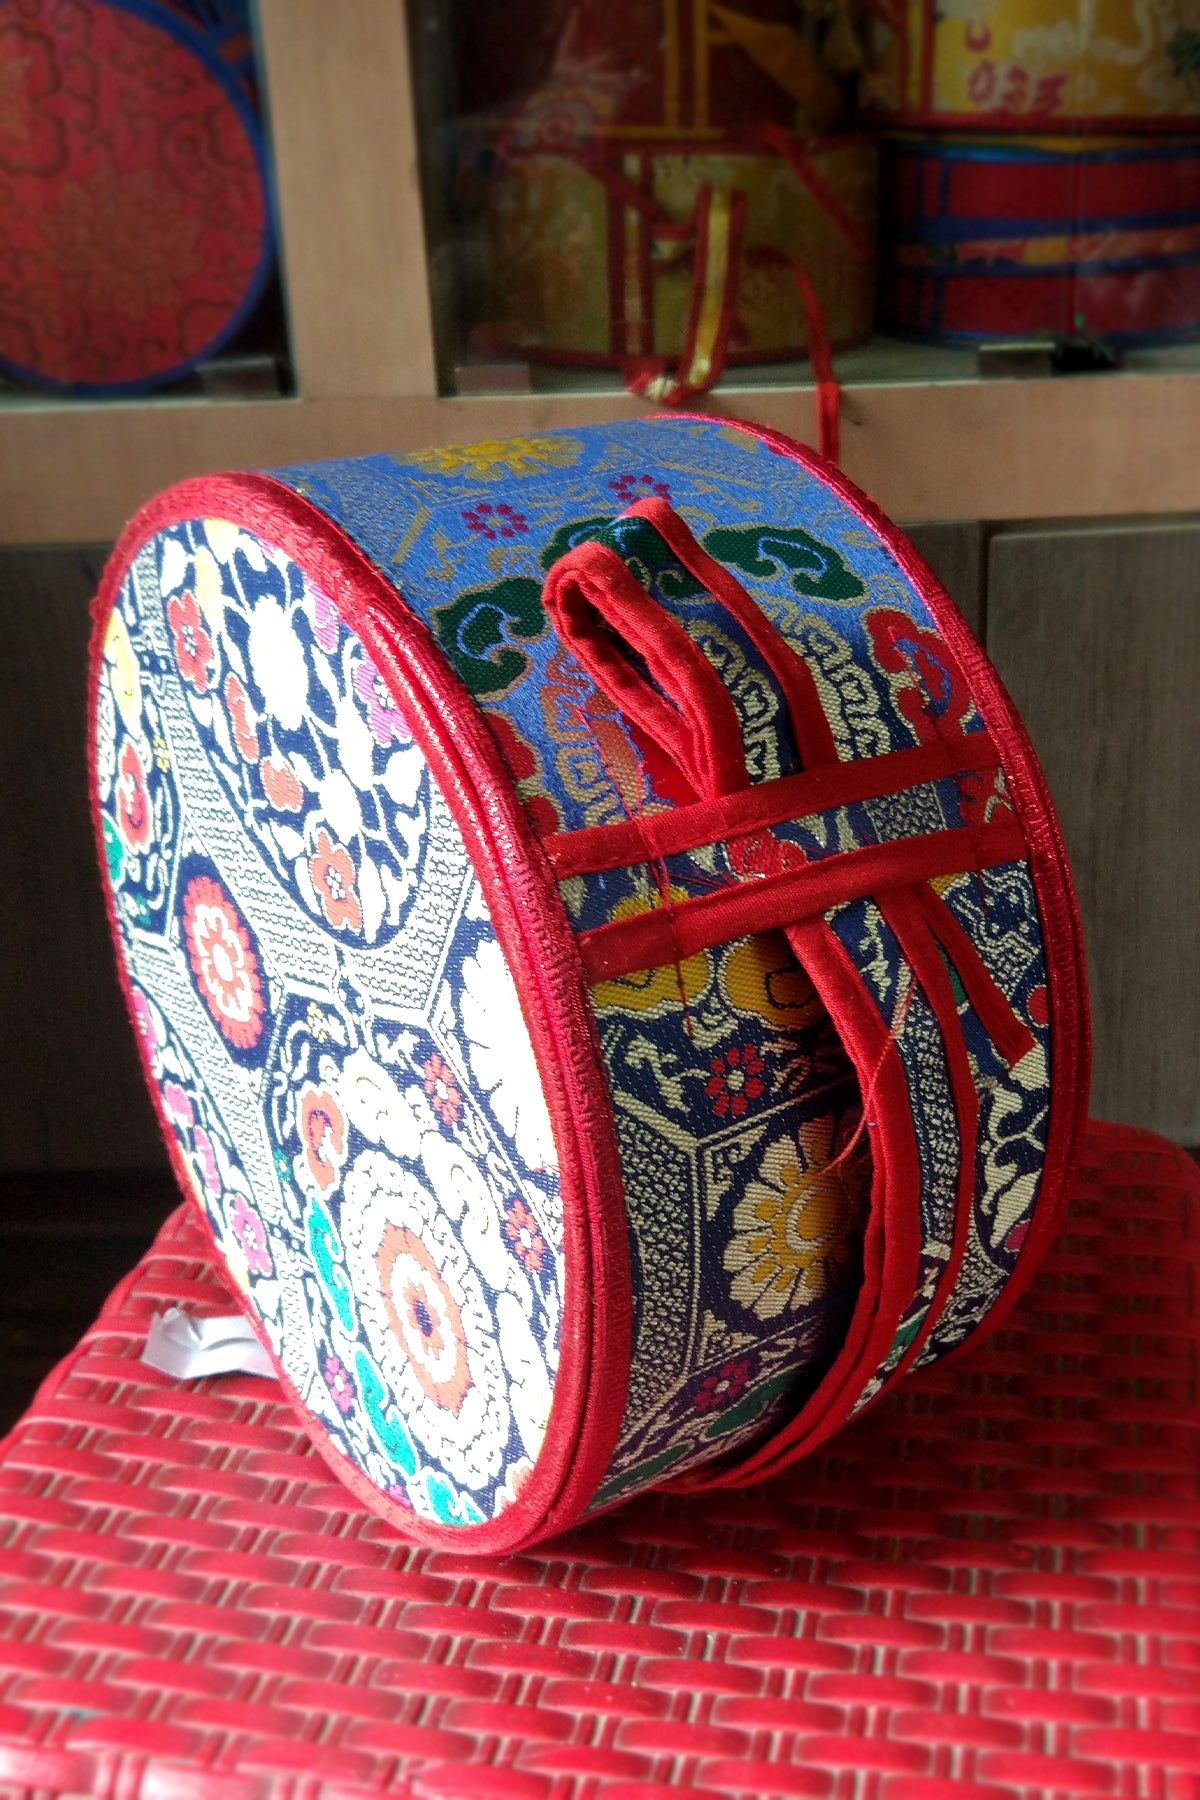 Tibetan Buddhist Handpainted Chod Drum/Damaru with red color cover